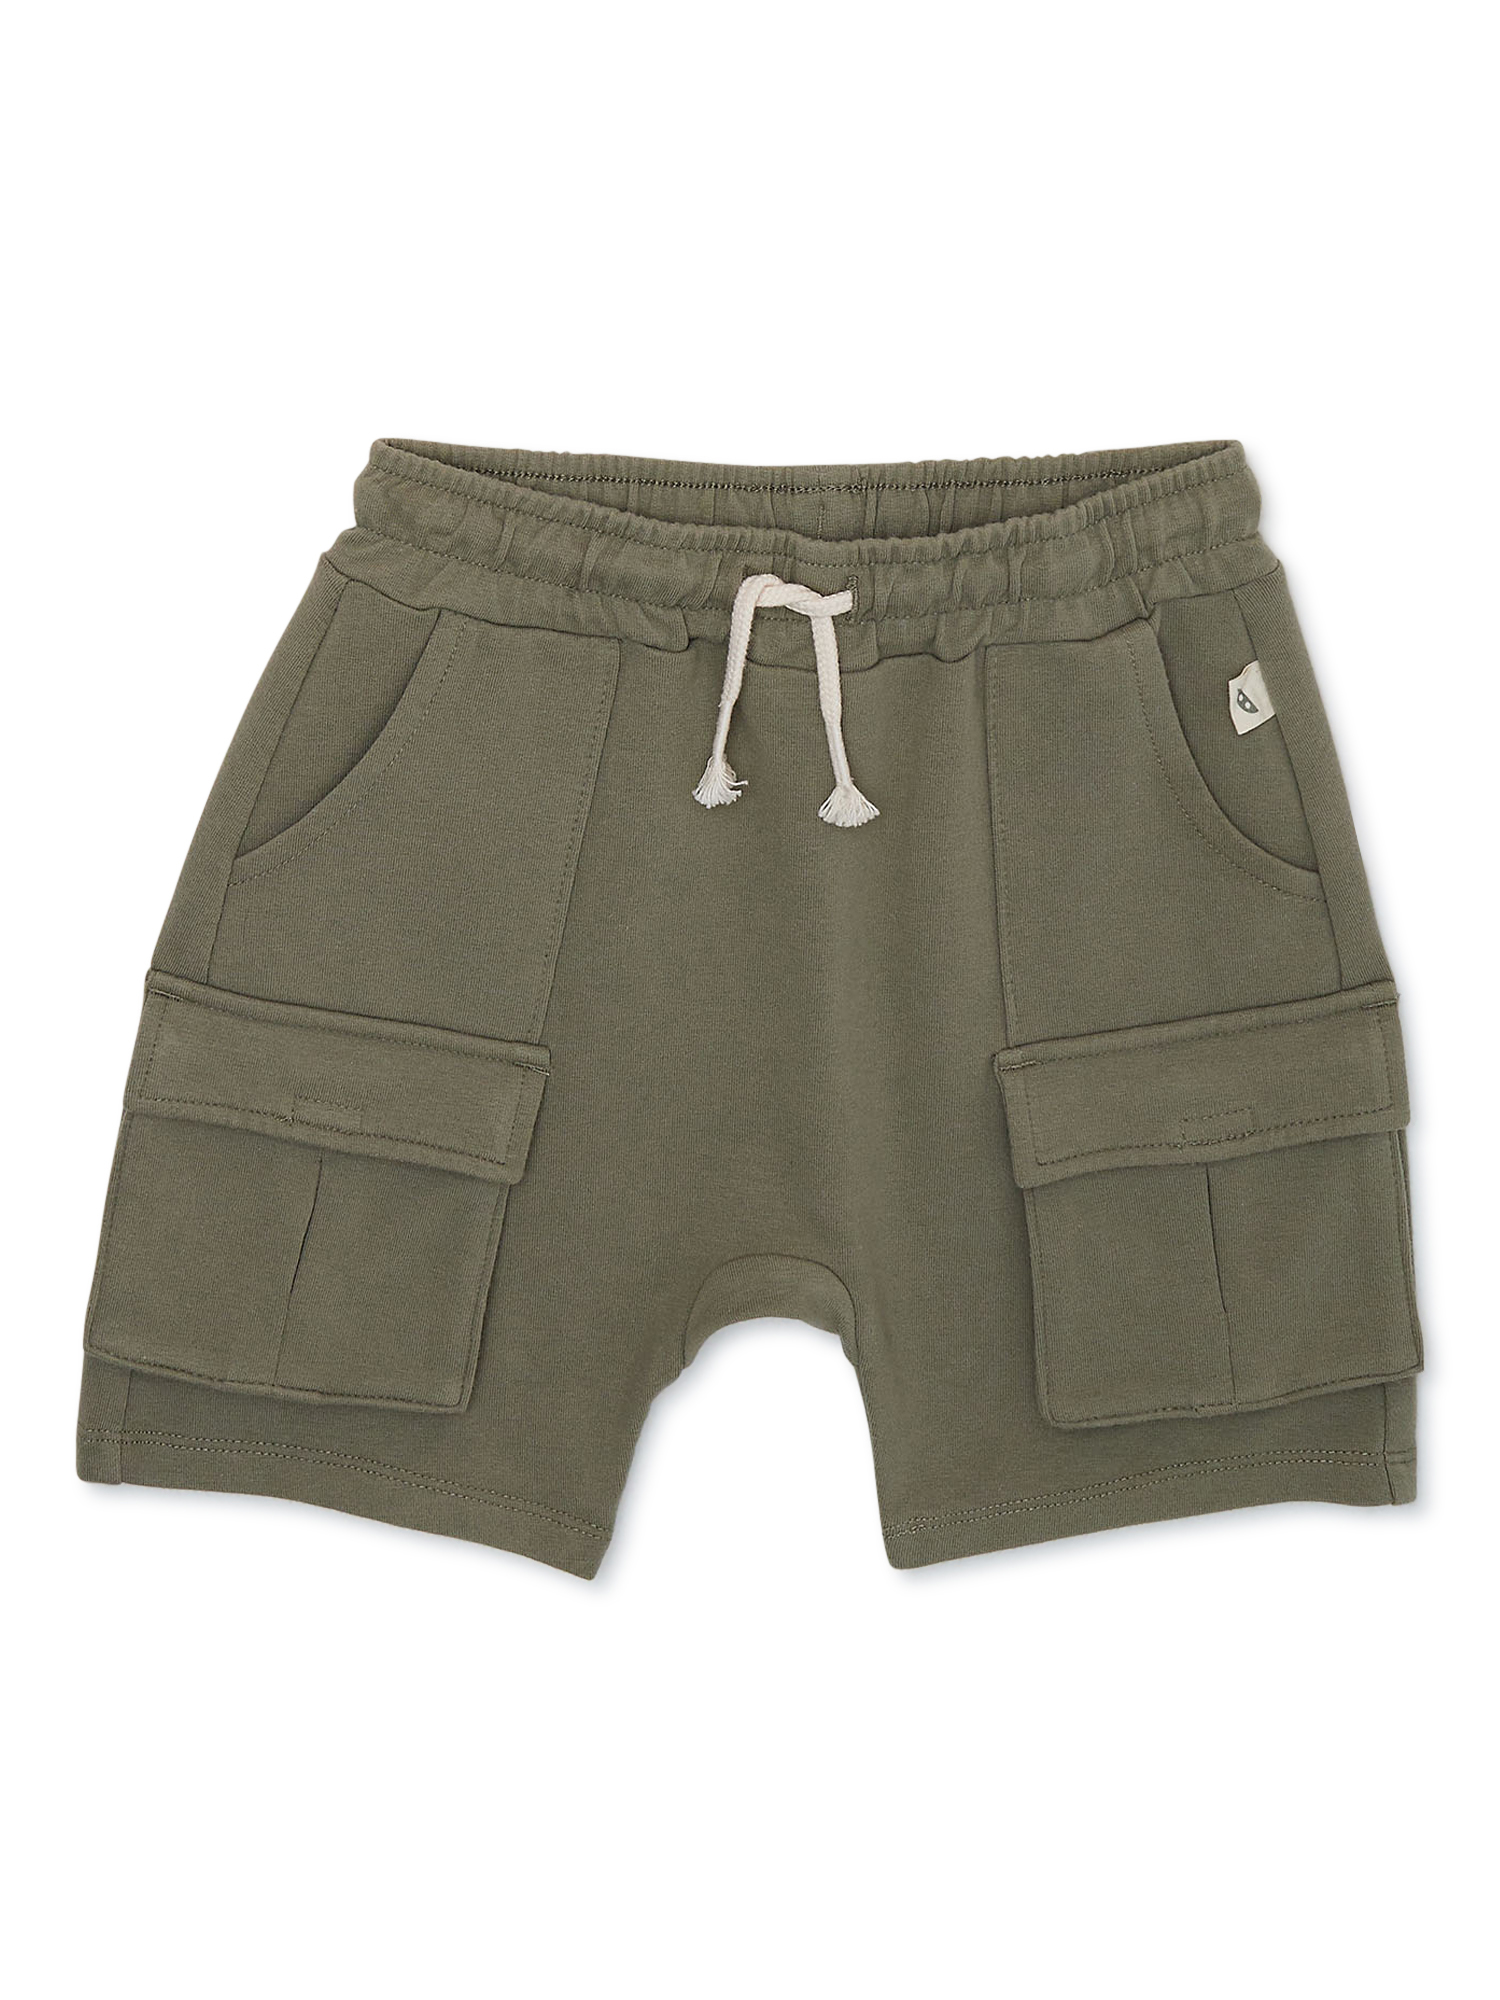 easy-peasy Toddler Boy French Terry Cargo Shorts, Sizes 12 Months-5T - image 1 of 5